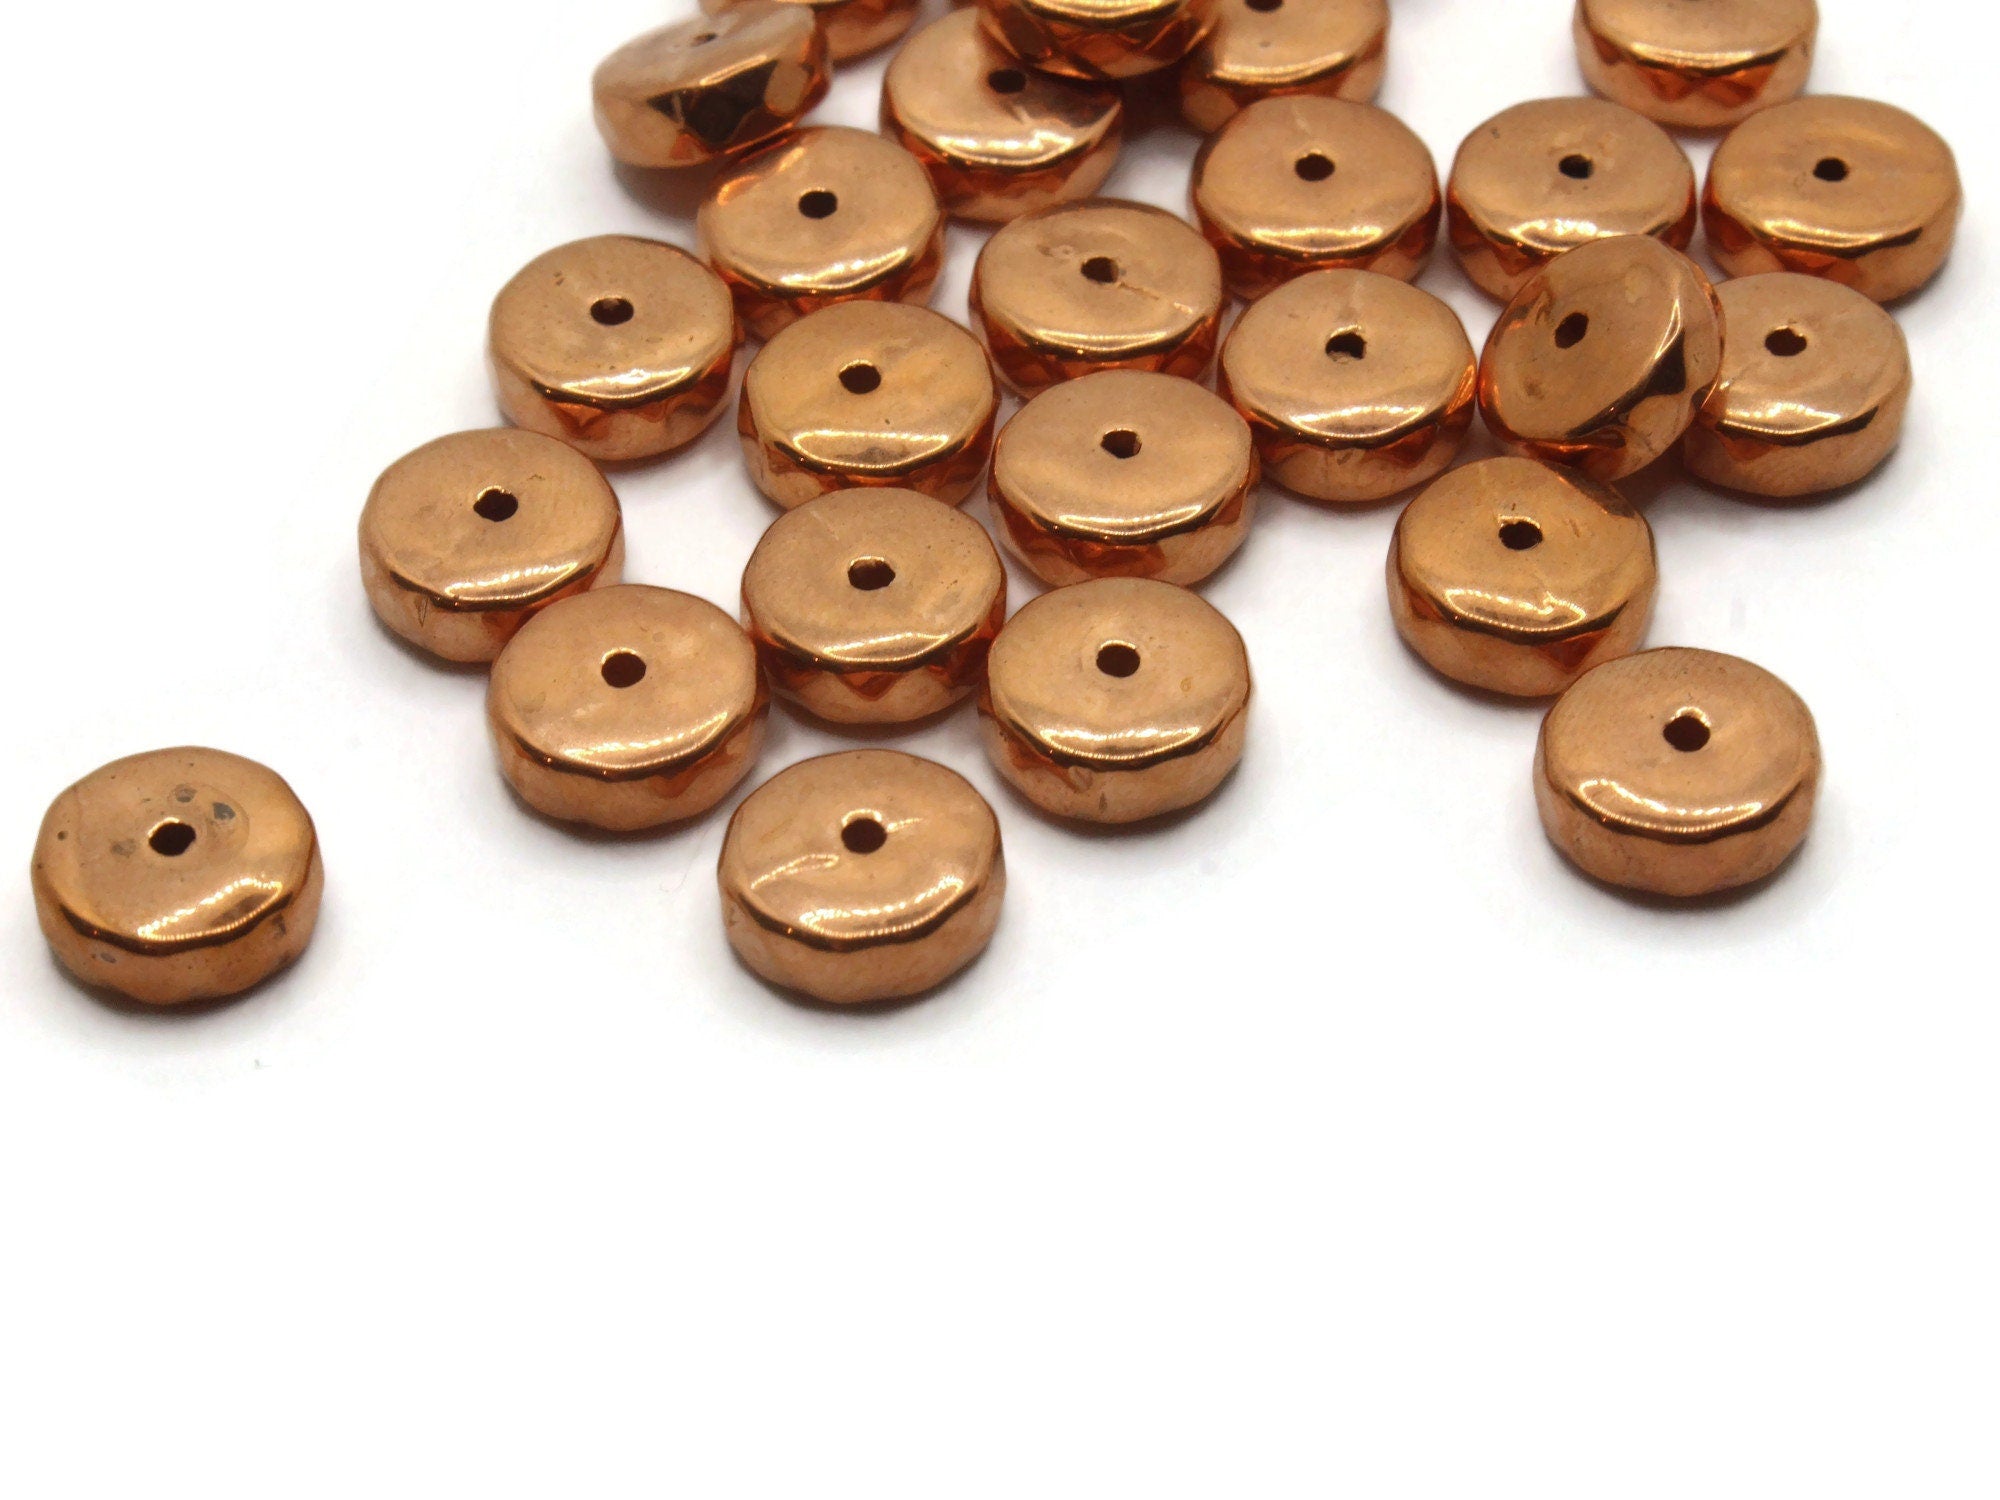 50 Stunning Tiny Antique Copper Metal Beads - (4mm) On Sale